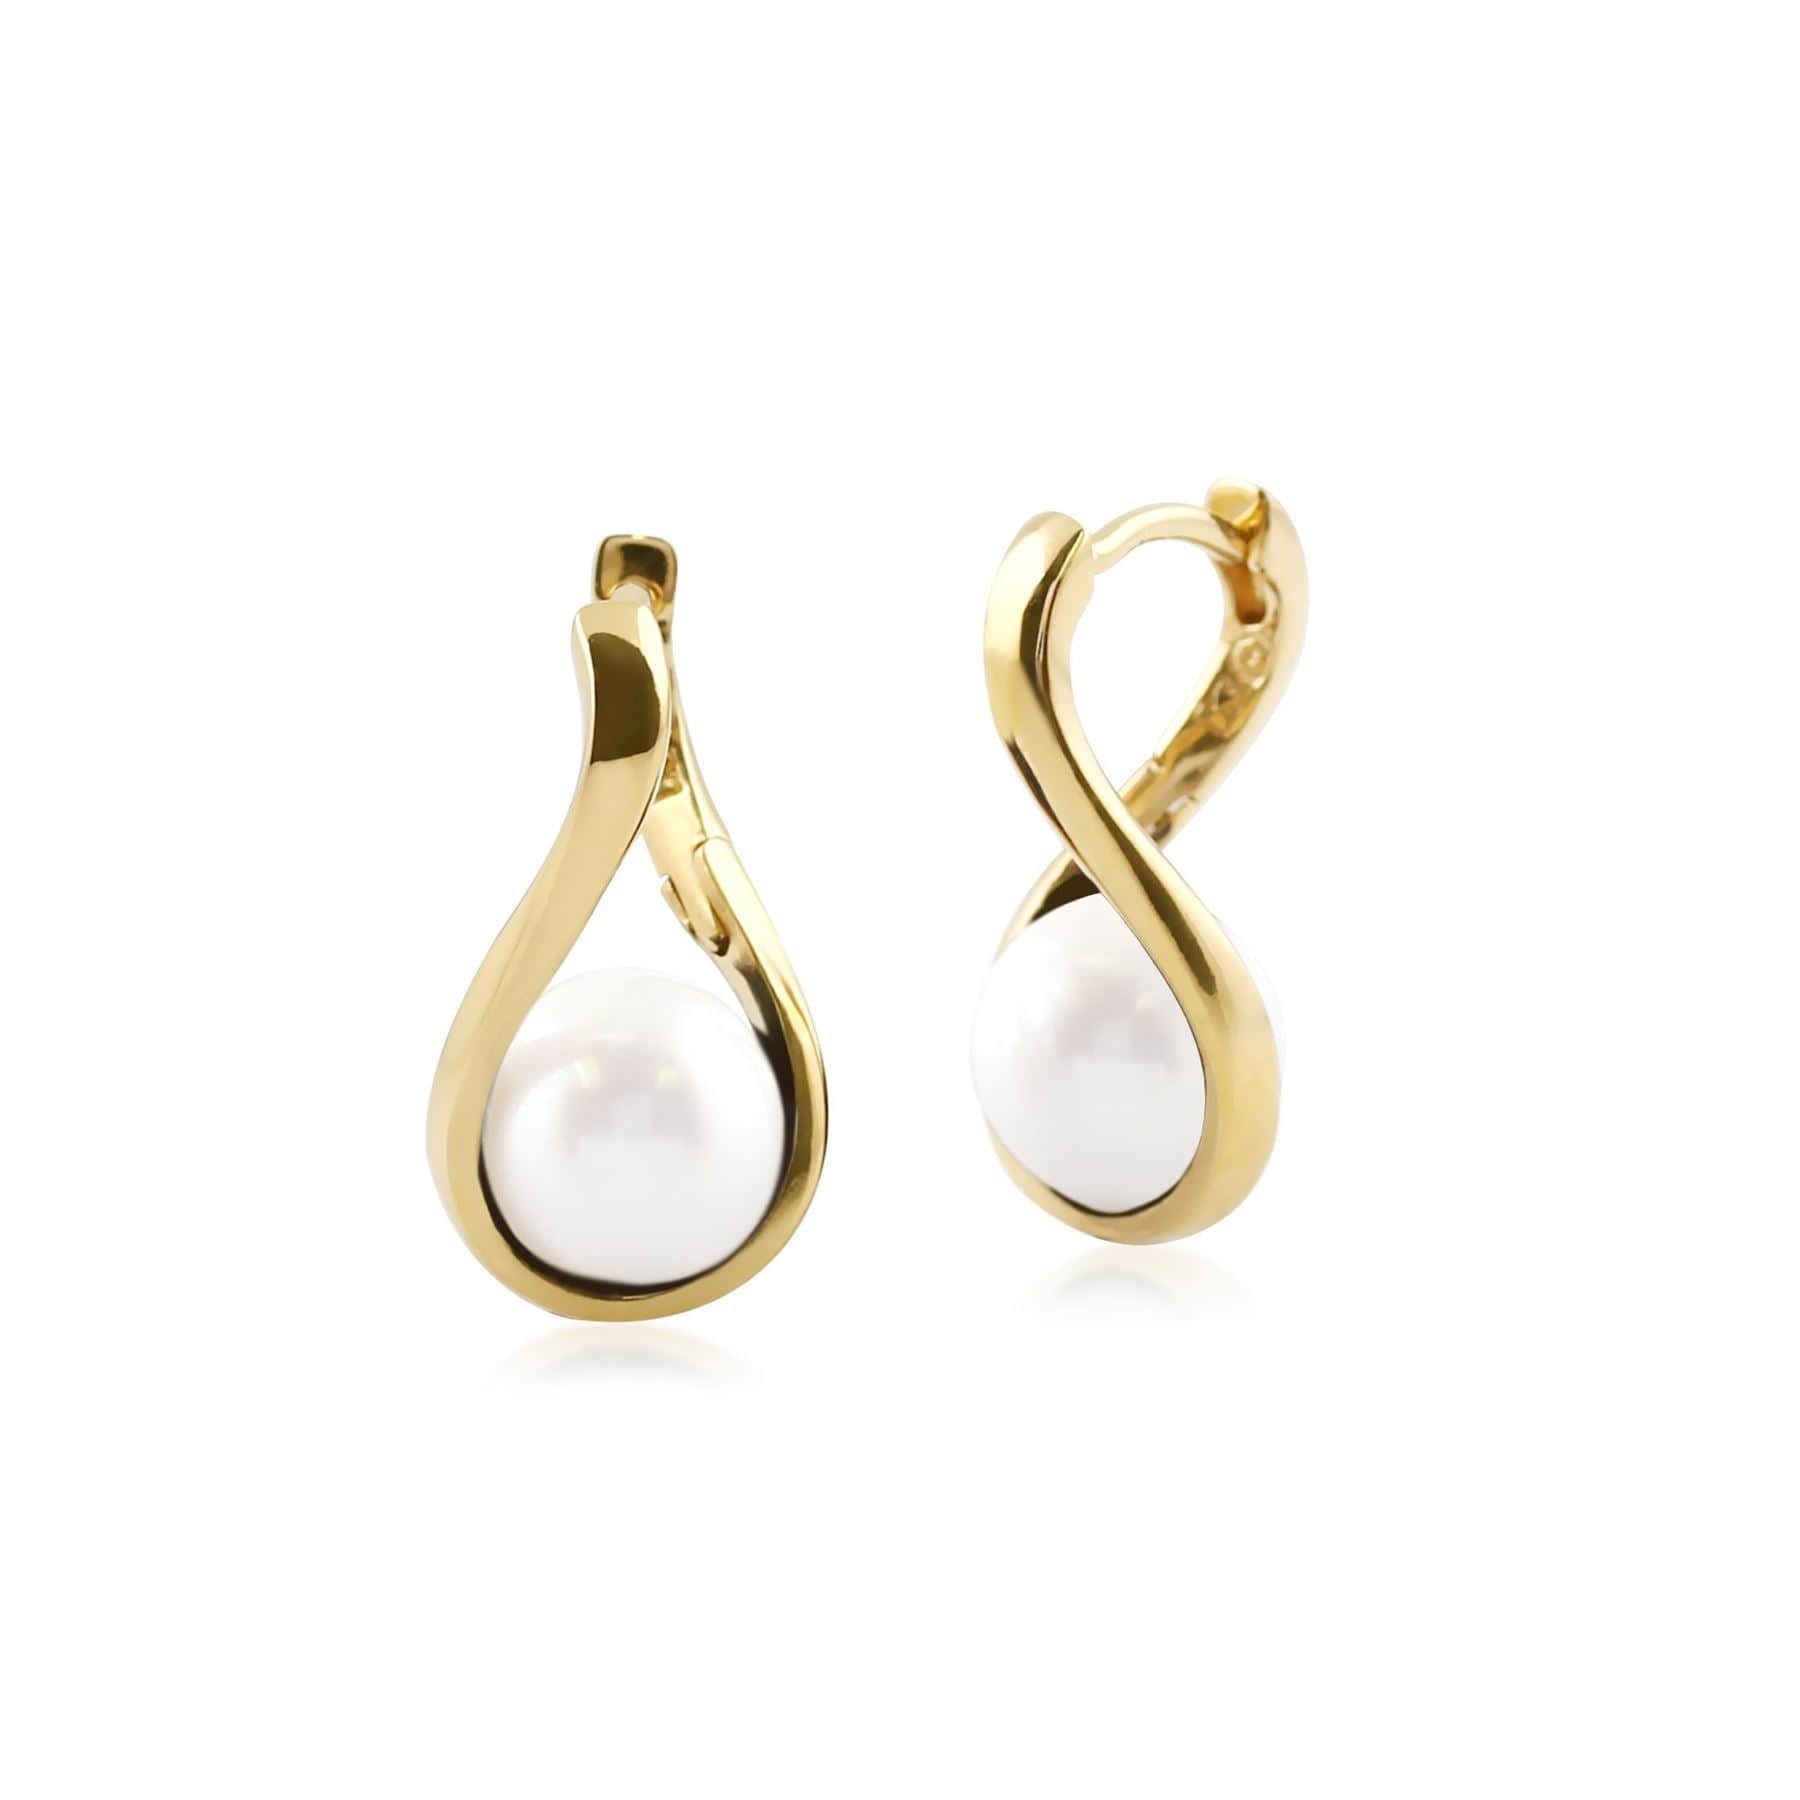 T0880E9083 Kosmos White Agate Orb Earrings in Yellow Gold Plated Sterling Silver 1